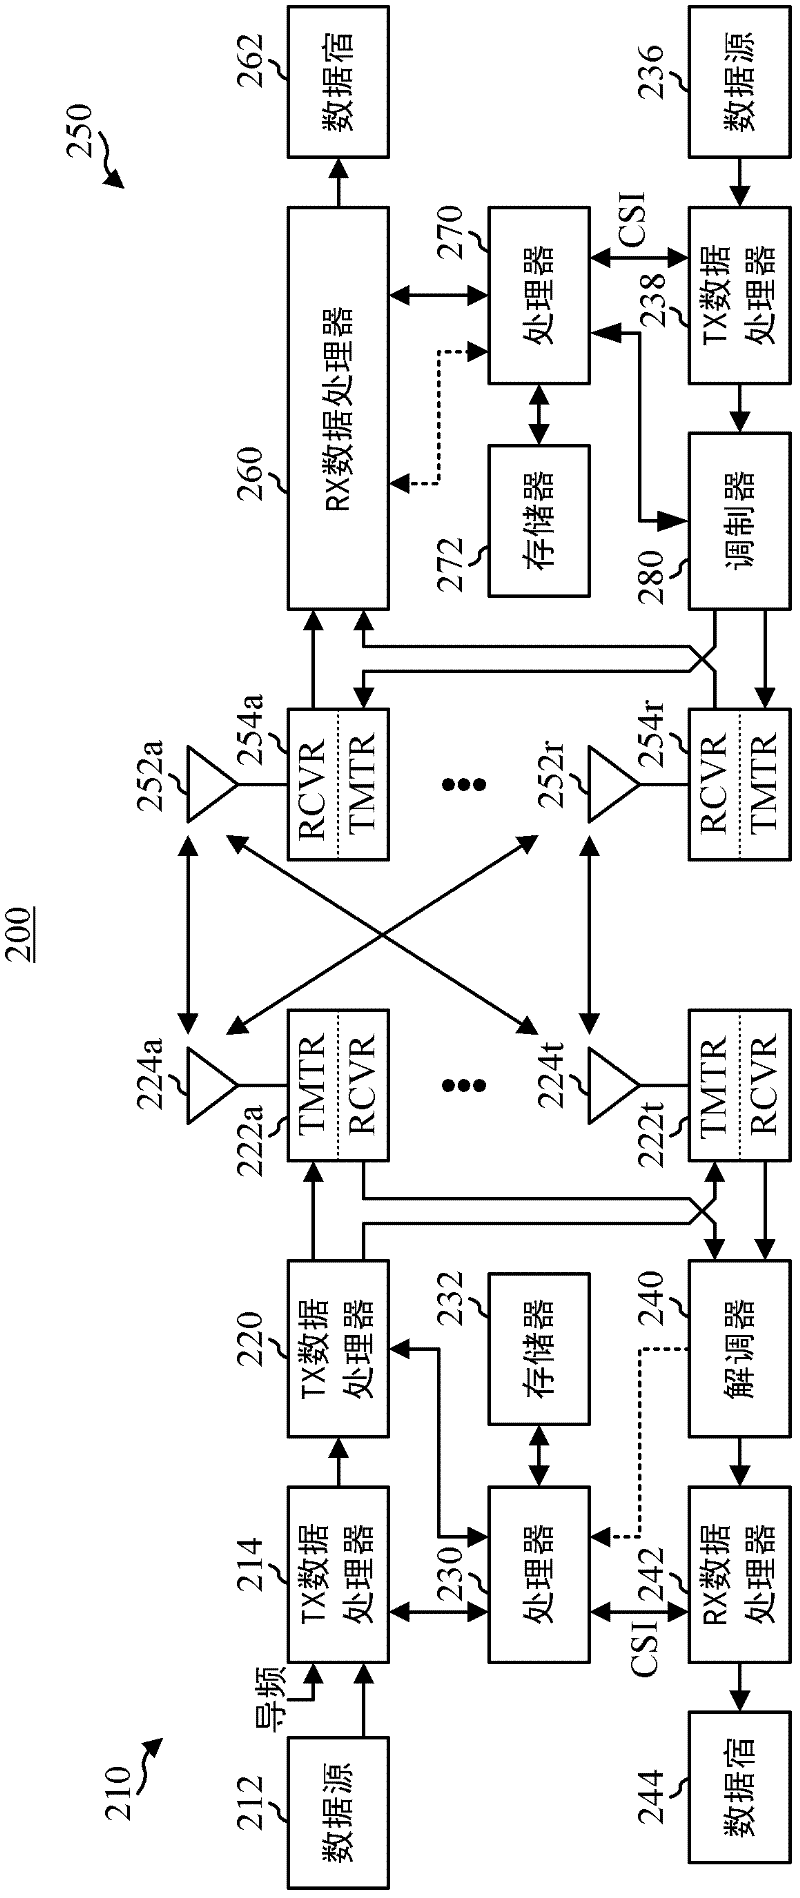 Scheduling algorithms for cooperative beamforming